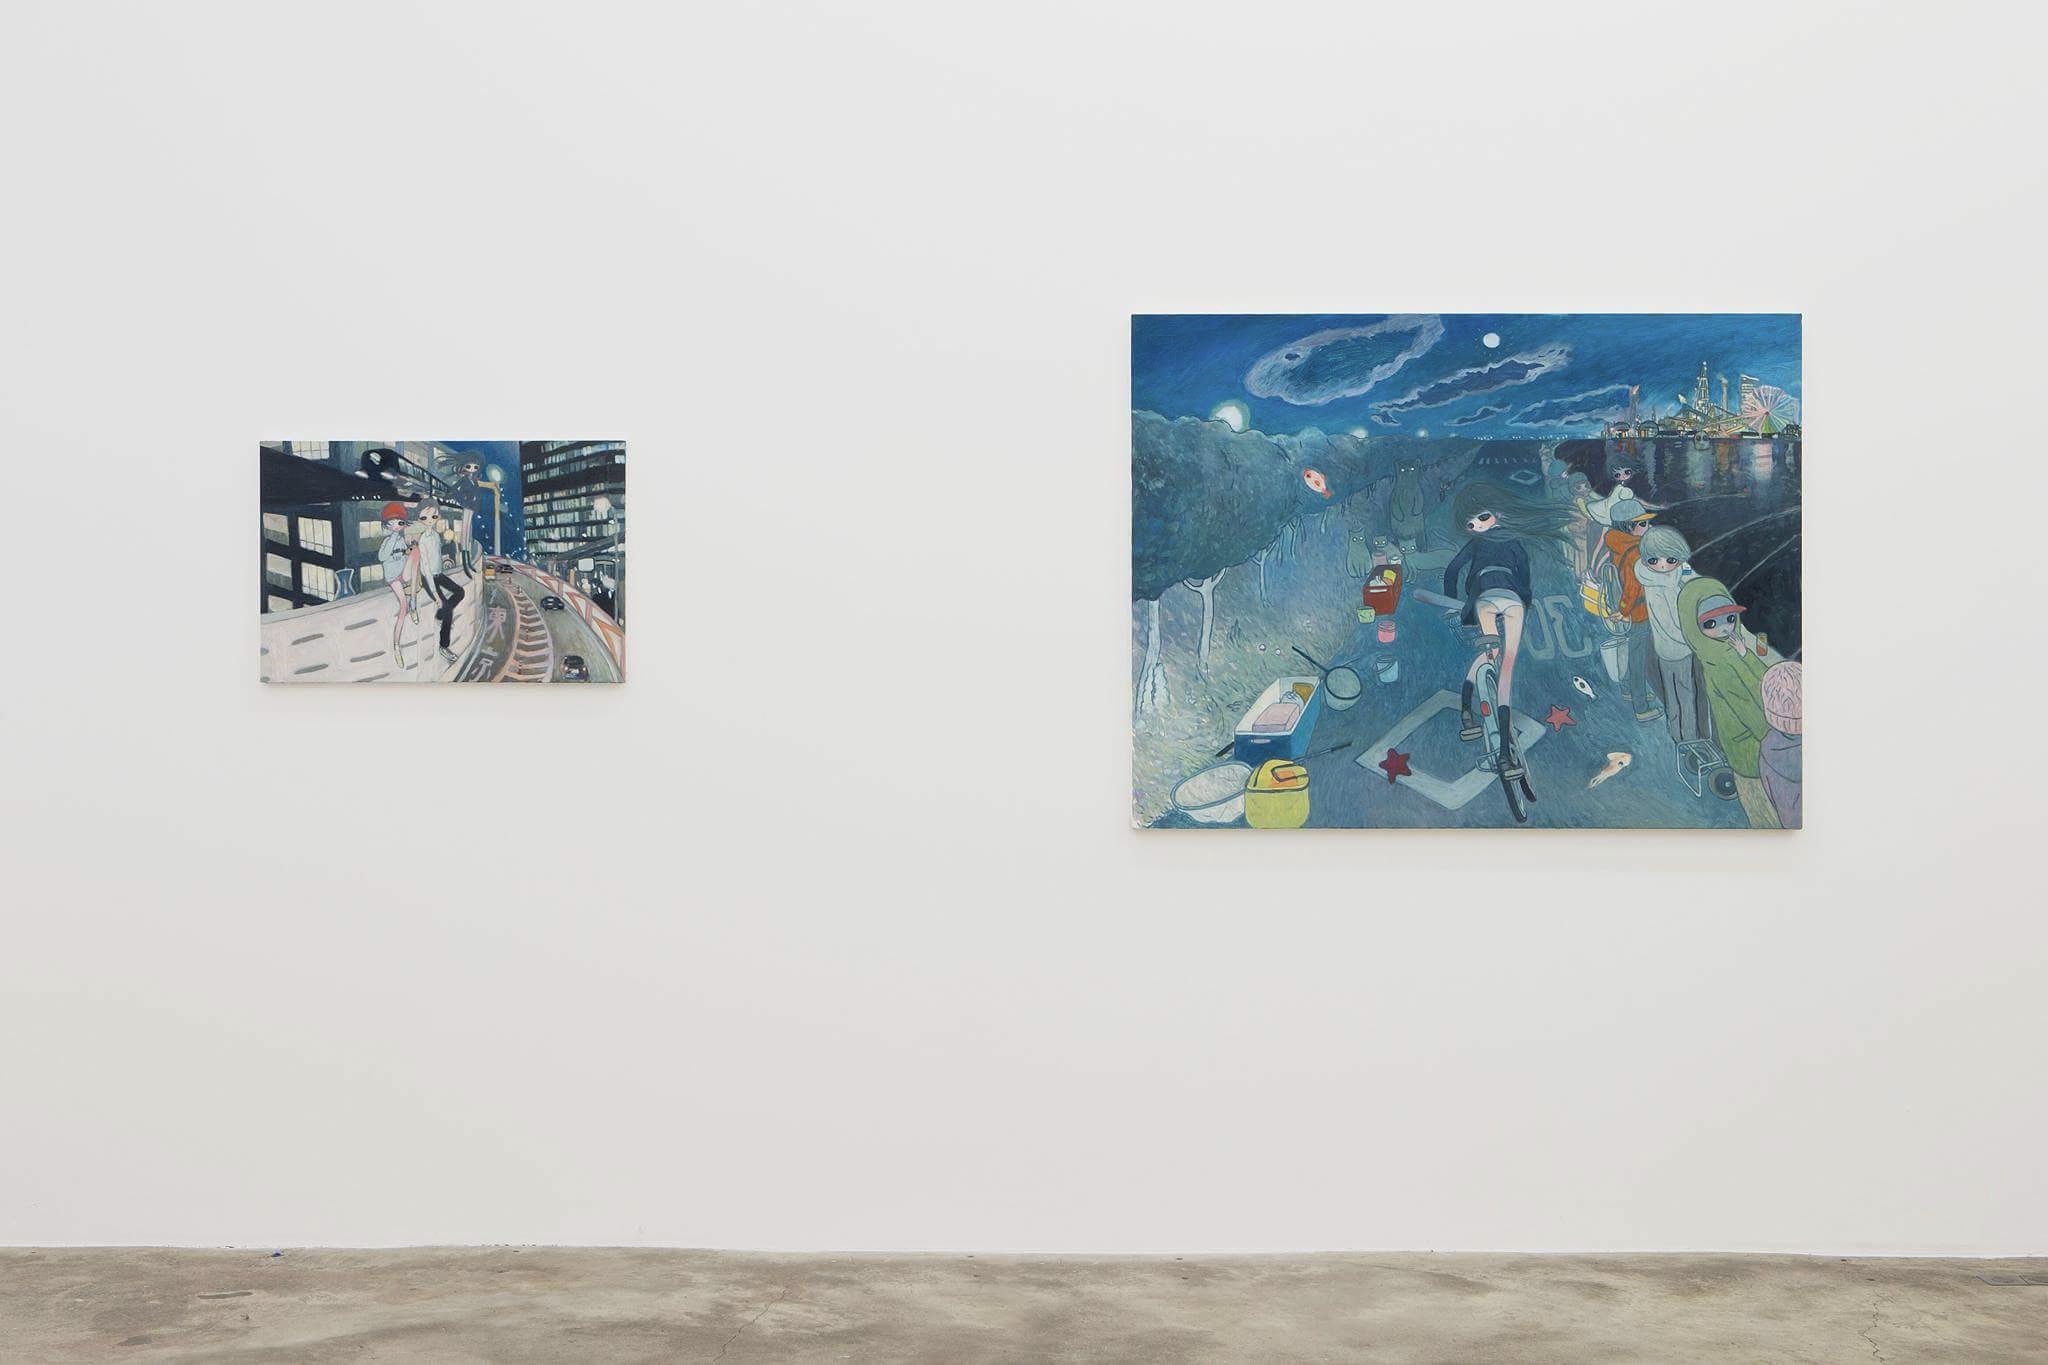 Aya Takano The Jelly Civilization Chronicle Galerie Perrotin Paris Exhibition